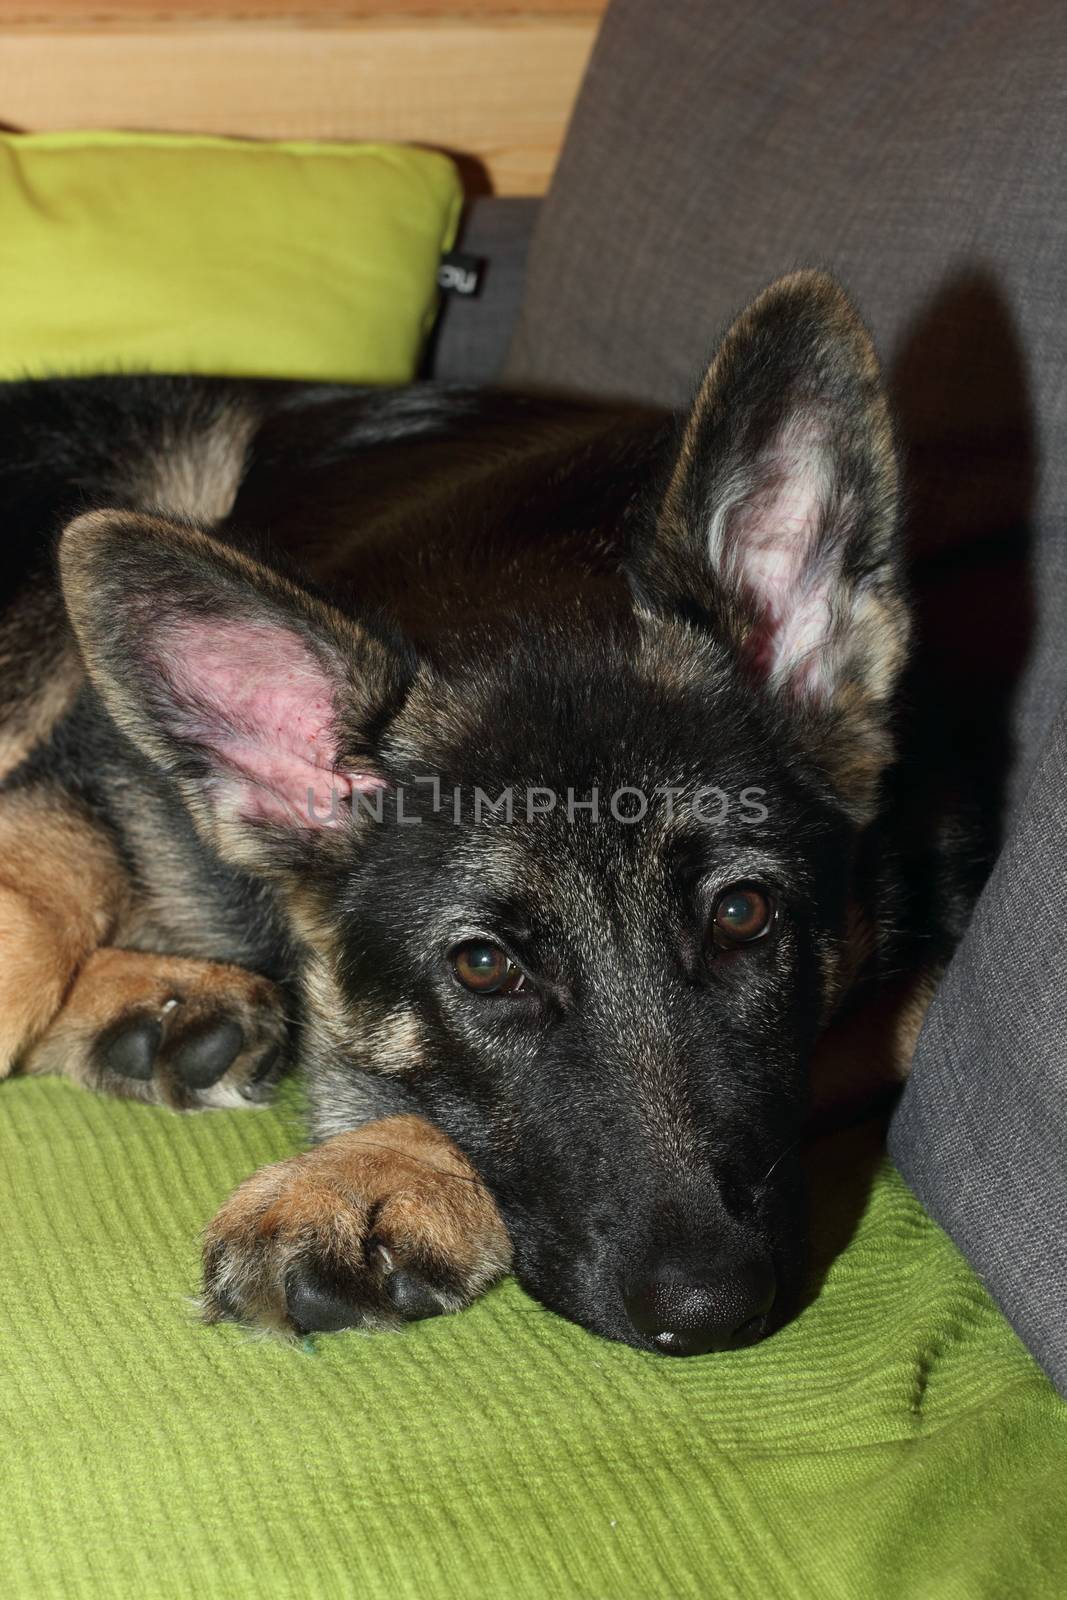 Grown German shepherd puppy lying on the couch.